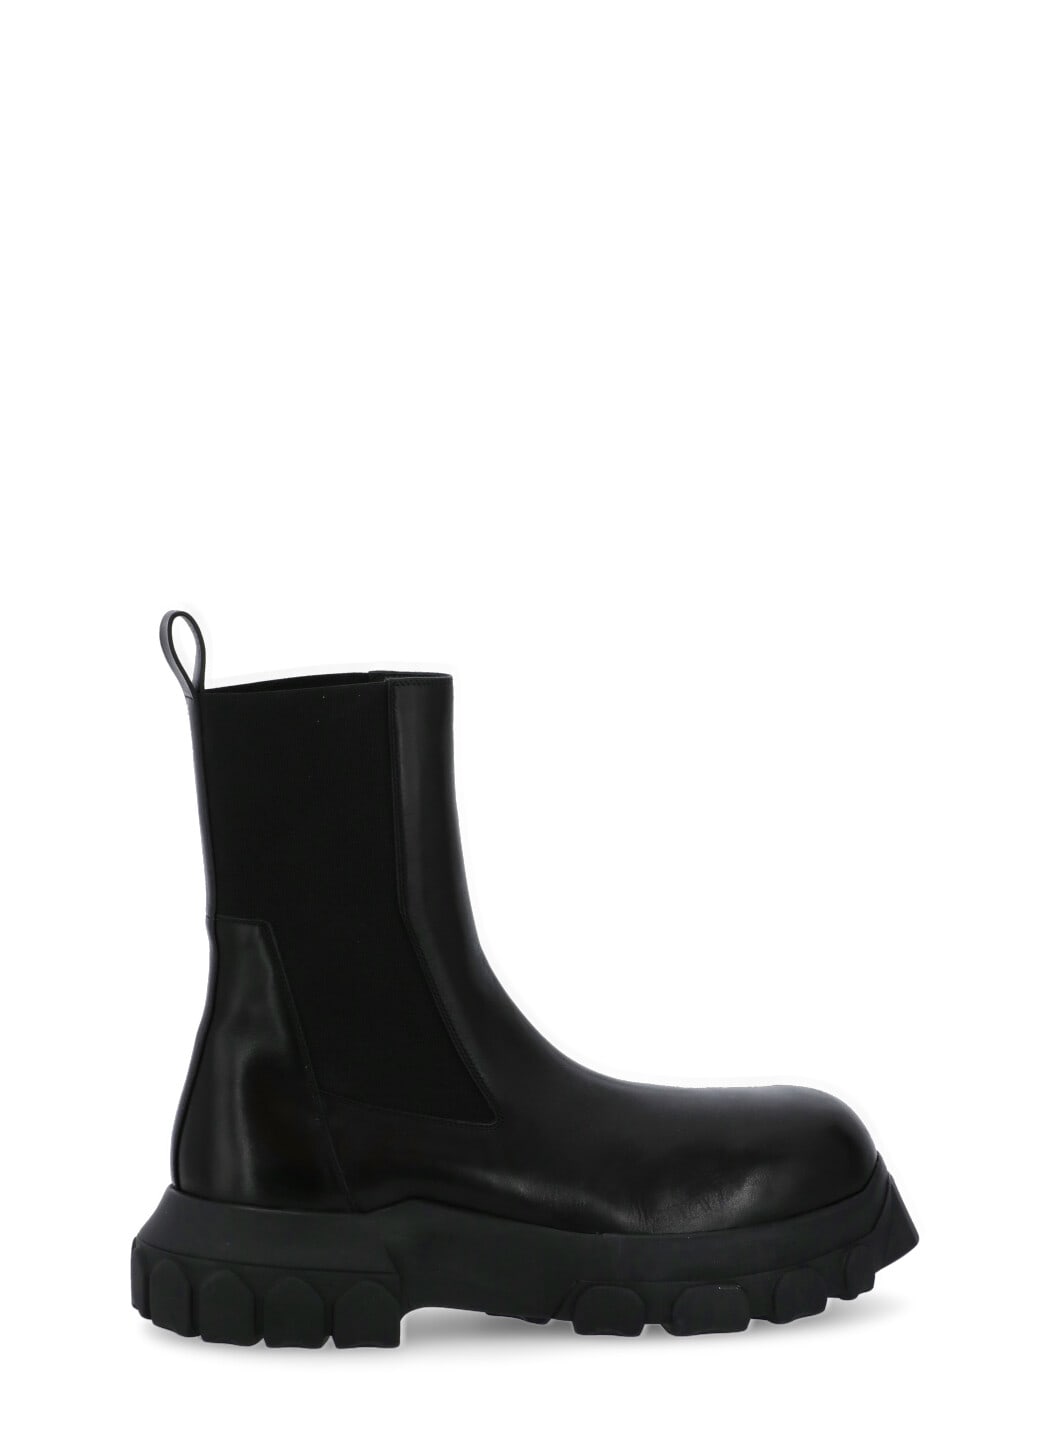 Rick Owens Beatle Bozo Tractor Ankle Boots